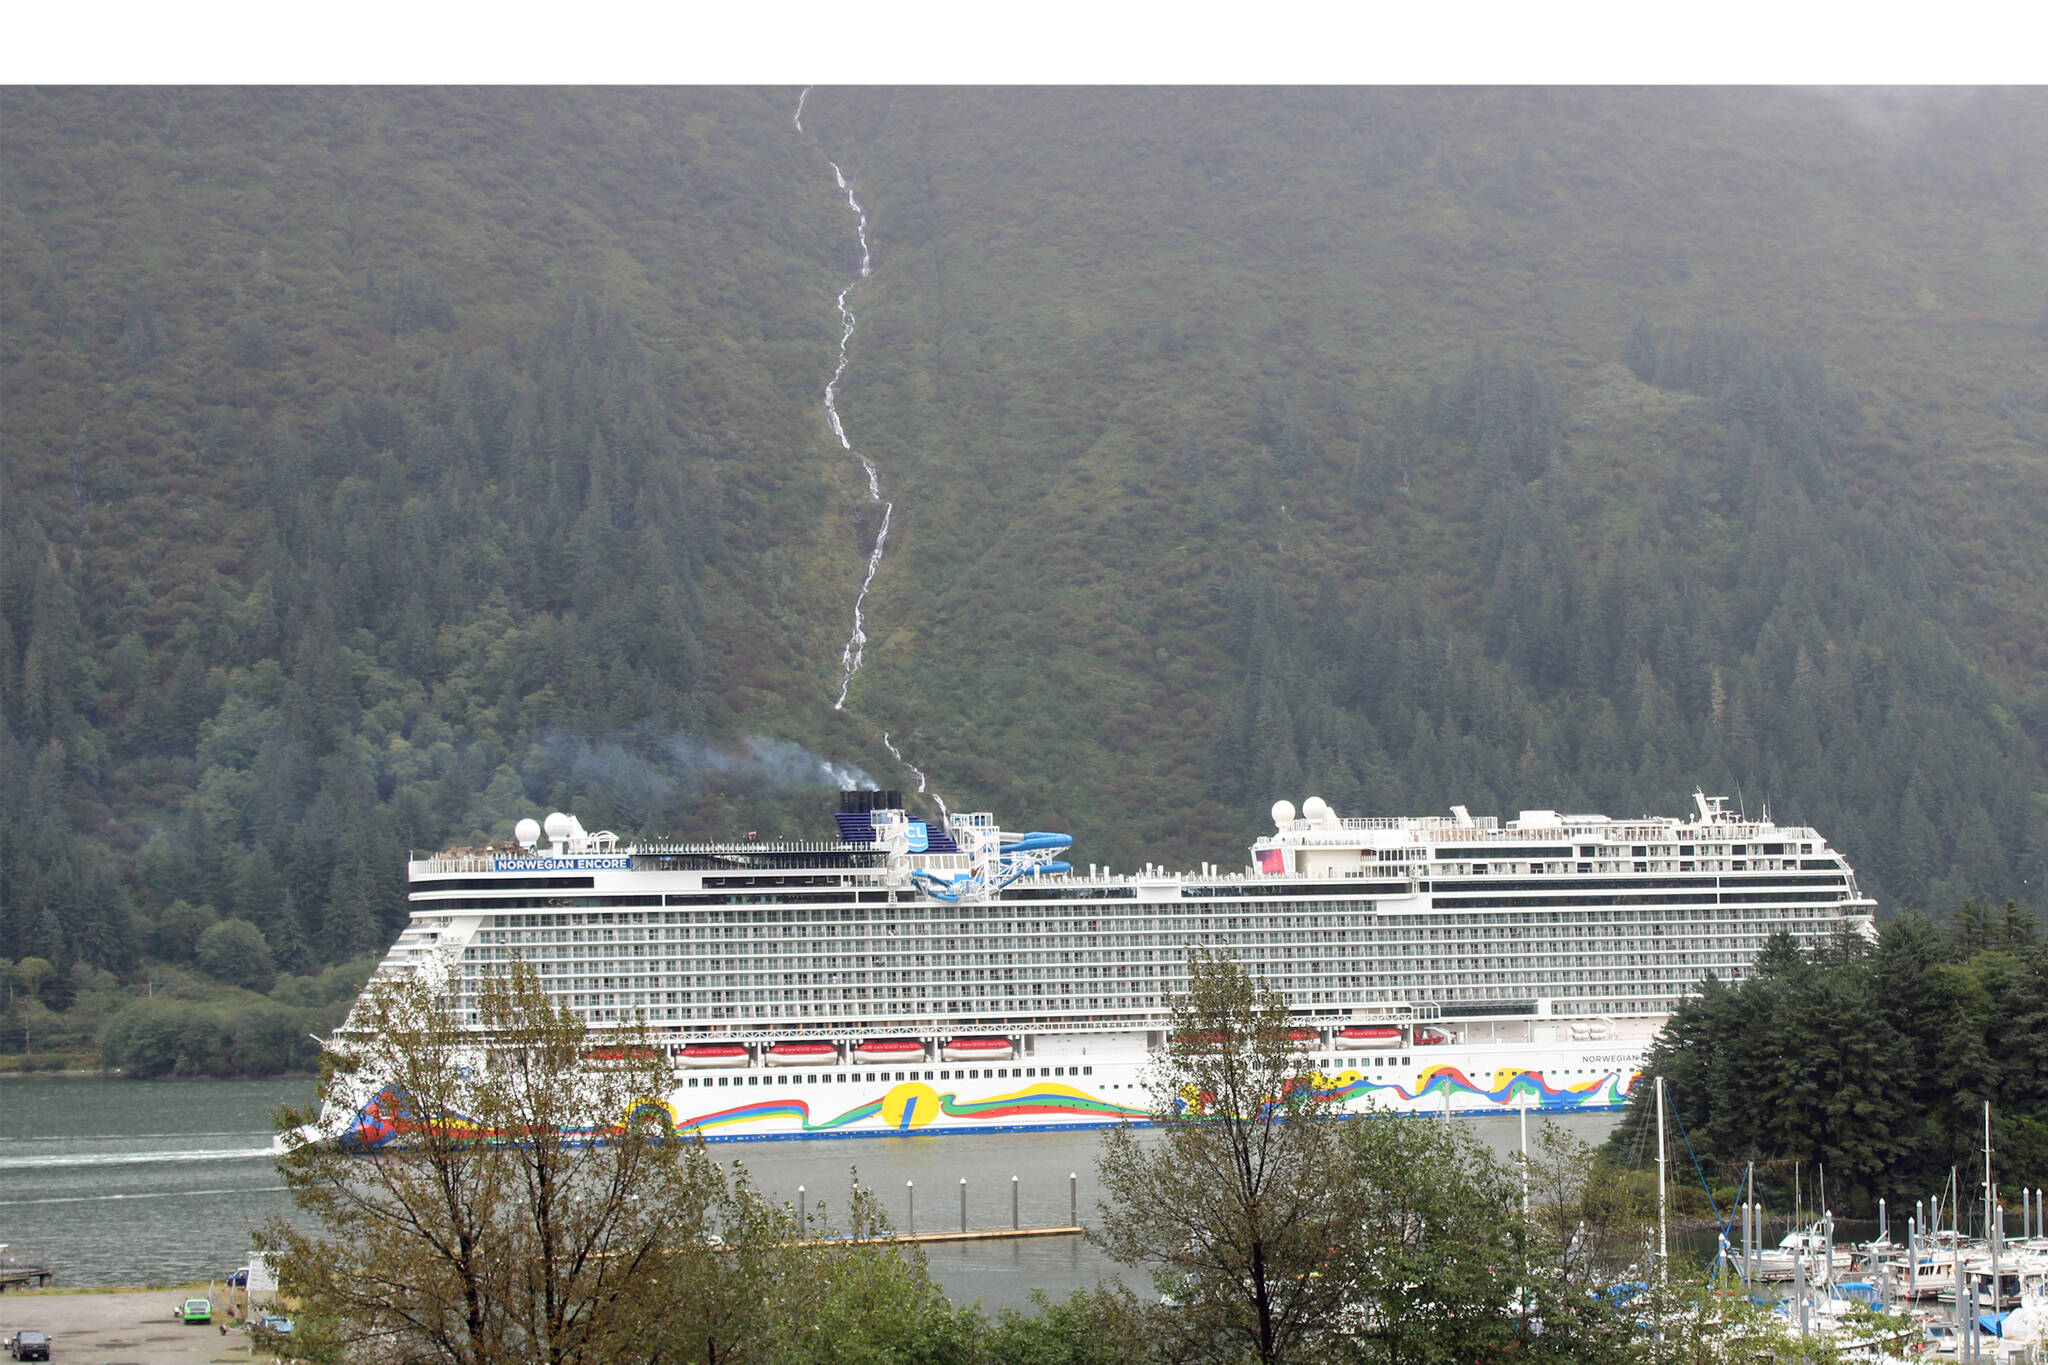 The Norwegian Encore sails past Douglas Island on Sept. 8, 2021. The Encore was visiting Juneau as part of an abbreviated cruise season this summer after COVID-19 canceled the 2020 season. The City and Borough of Juneau recently conducted an online survey for residents to share their views on the tourism industry. Local cruise critics say they are eagerly awaiting survey results. (Dana Zigmund/Juneau Empire)